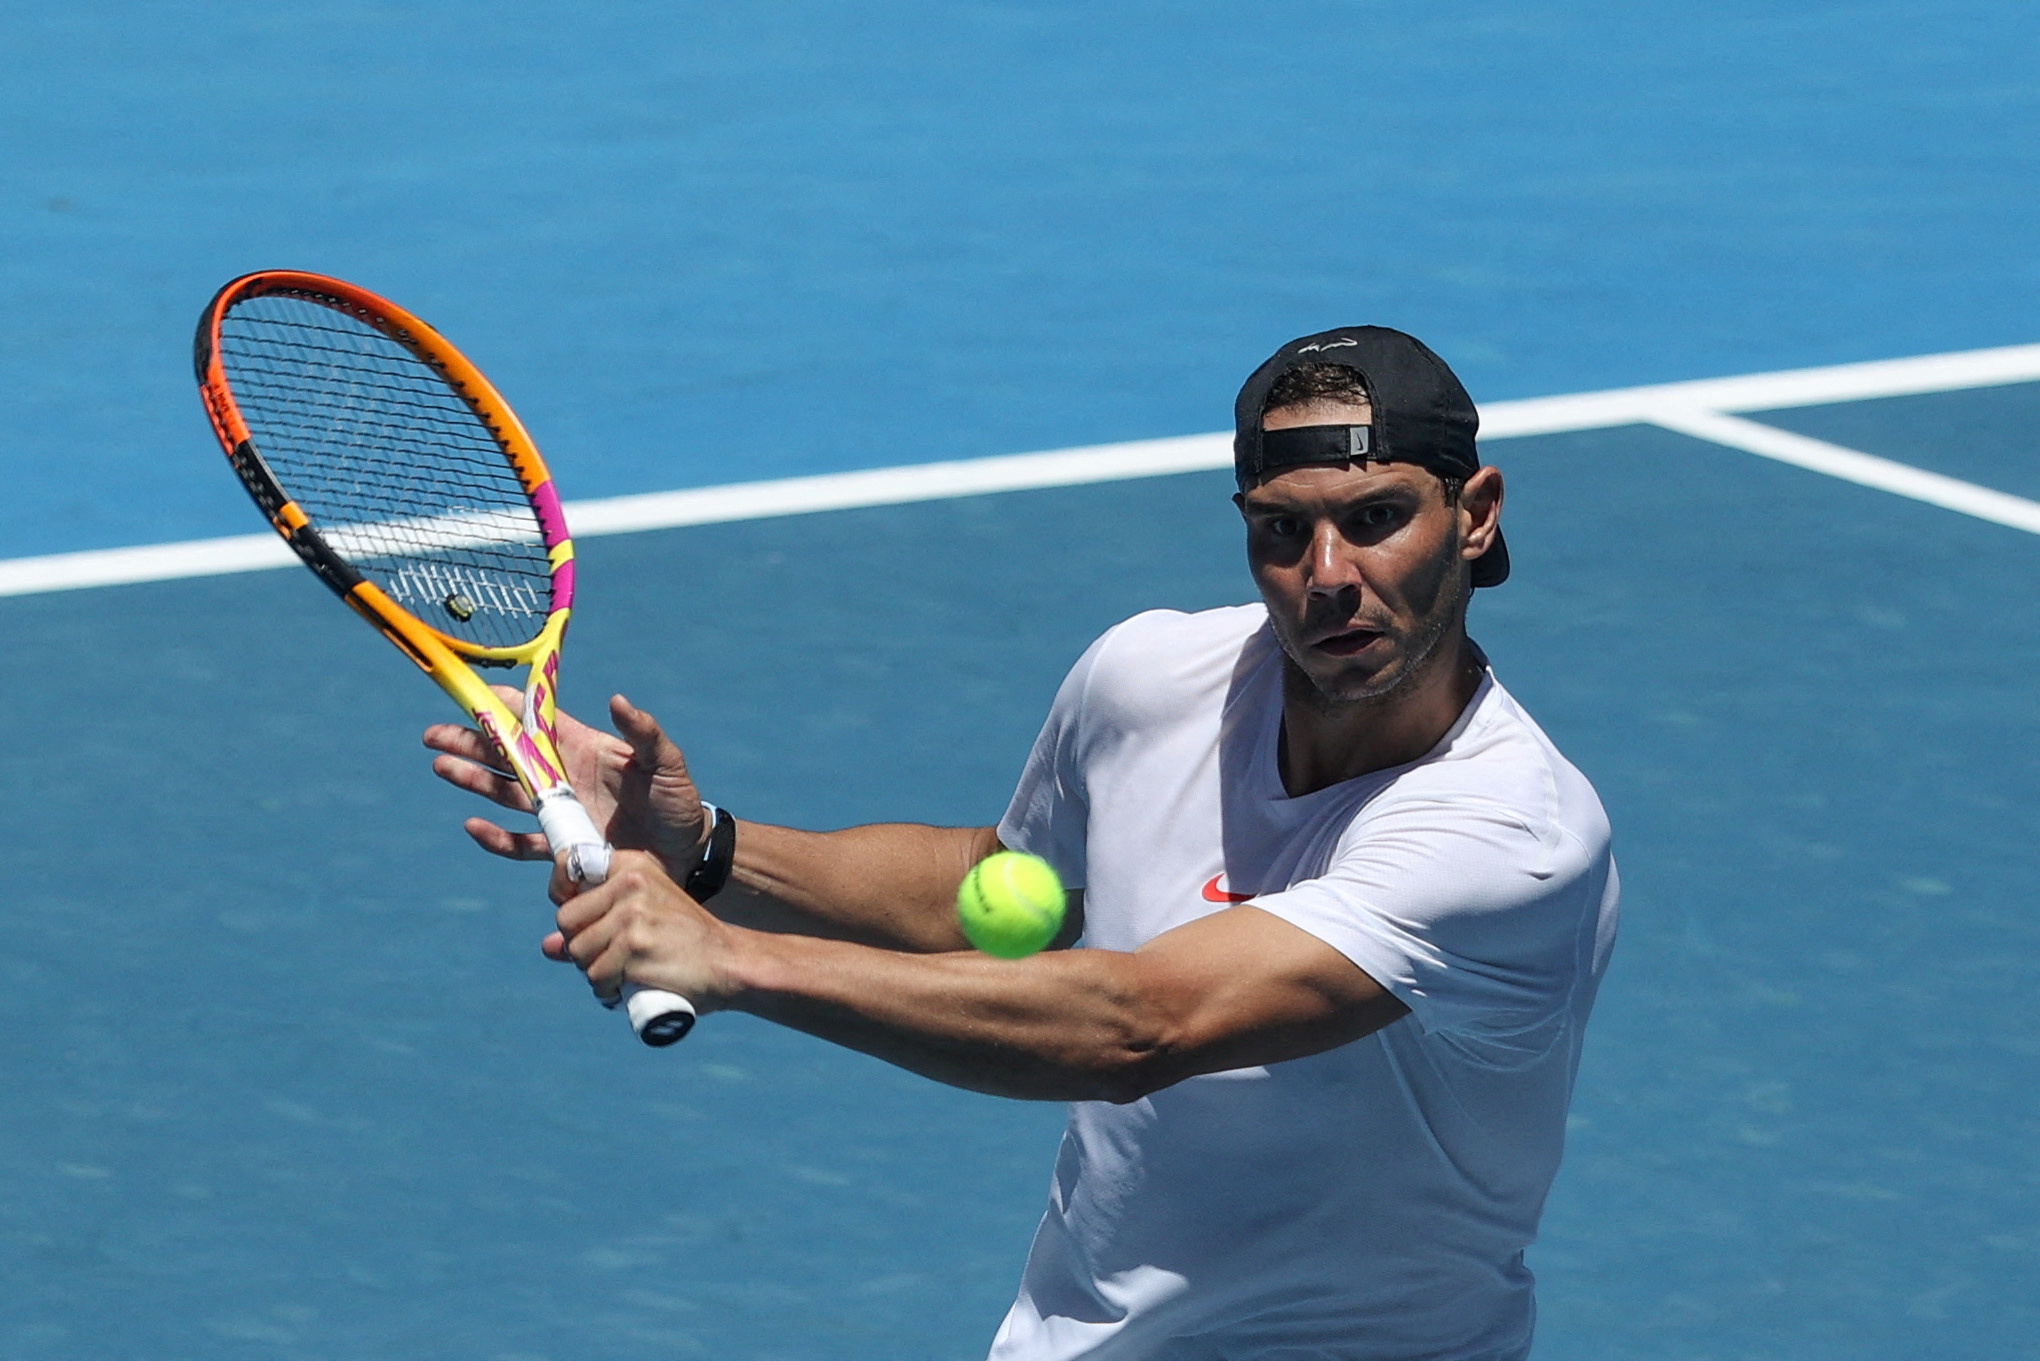 Spain's Rafael Nadal practices in the lead-up to the 2022 Australian Open tennis tournament at Melbourne Park in Melbourne, Australia, January 3, 2022.  